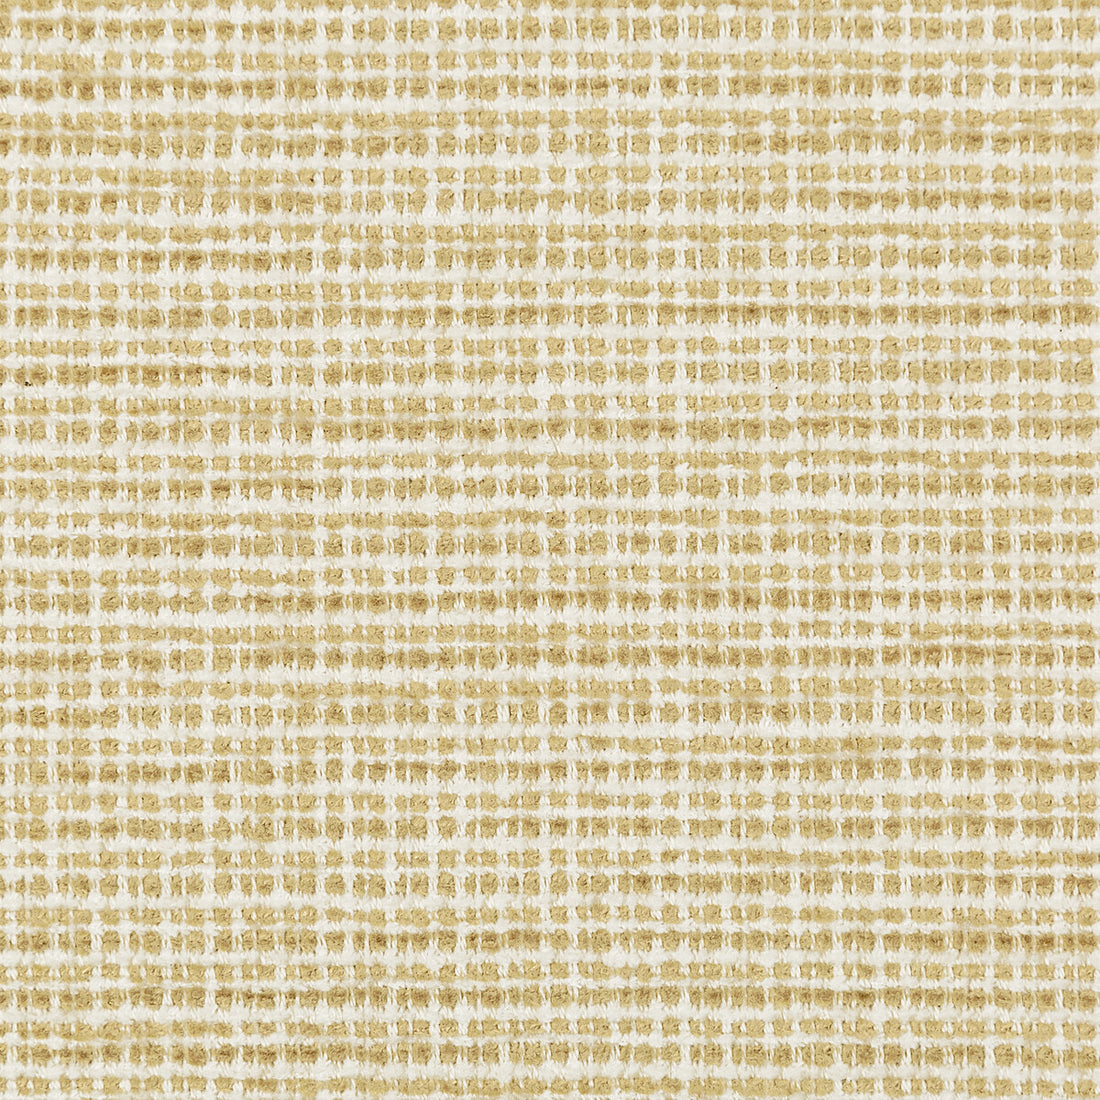 Freney Texture fabric in honey color - pattern 8019149.14.0 - by Brunschwig &amp; Fils in the Chambery Textures II collection